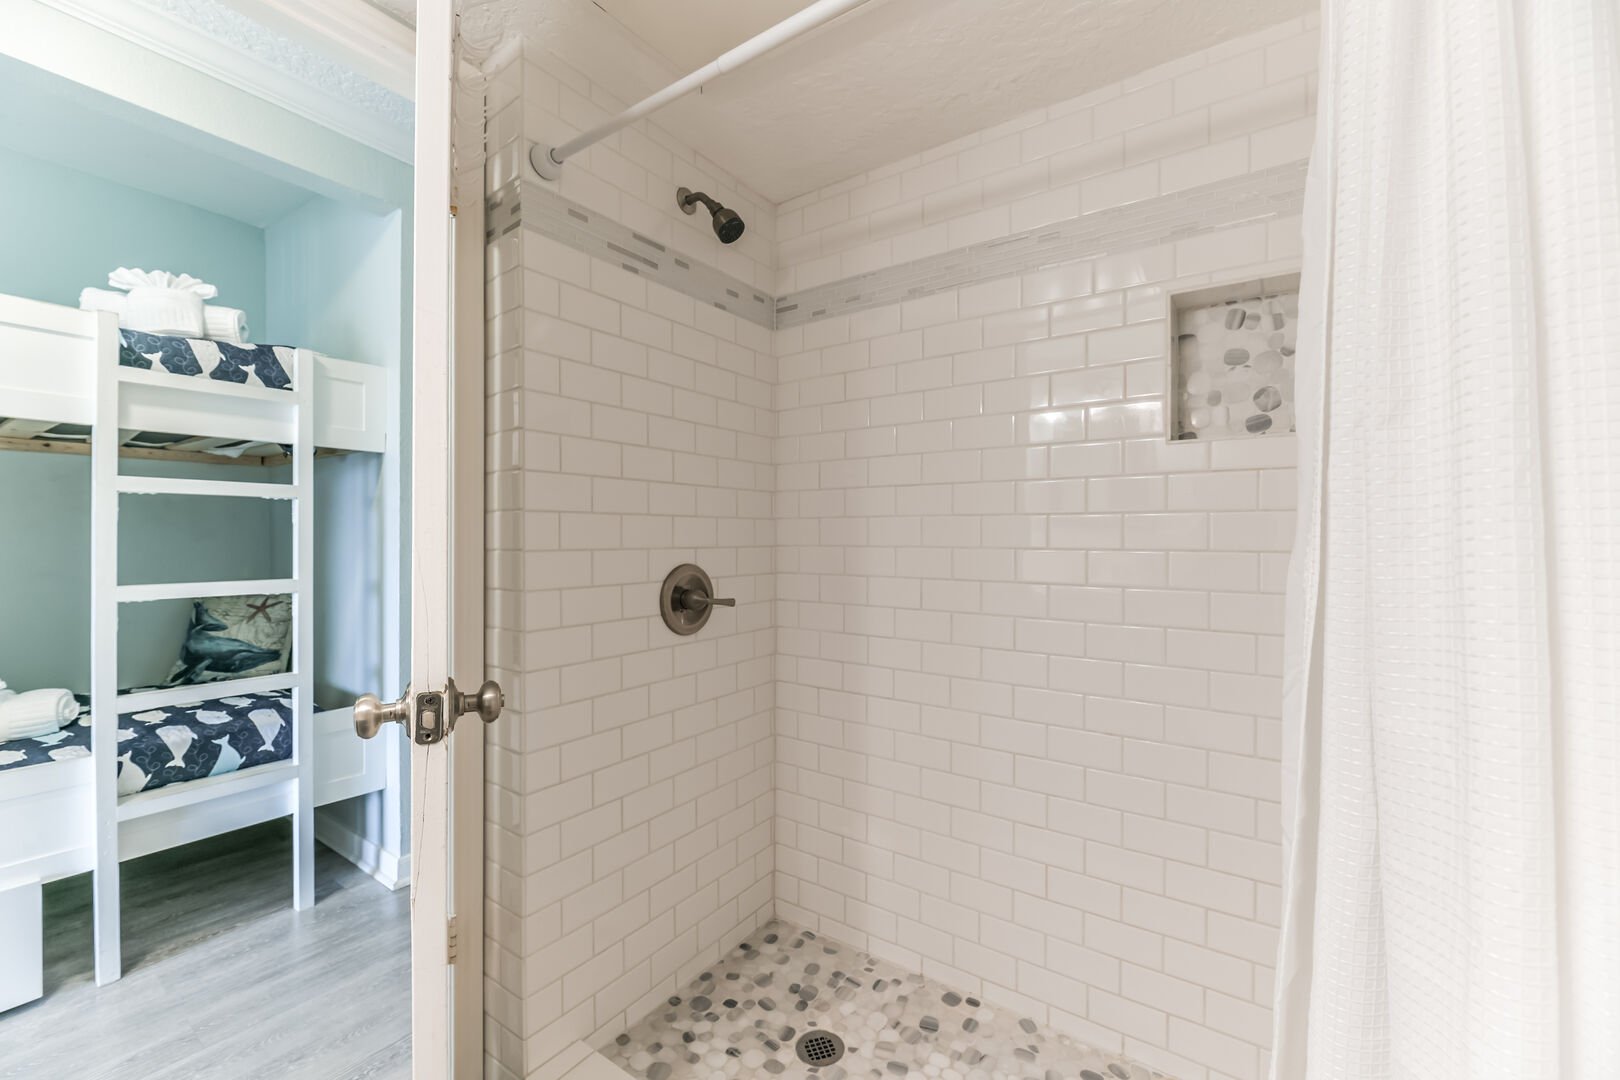 Custom tiled, walk-in shower for a warm, relaxing end of the day.